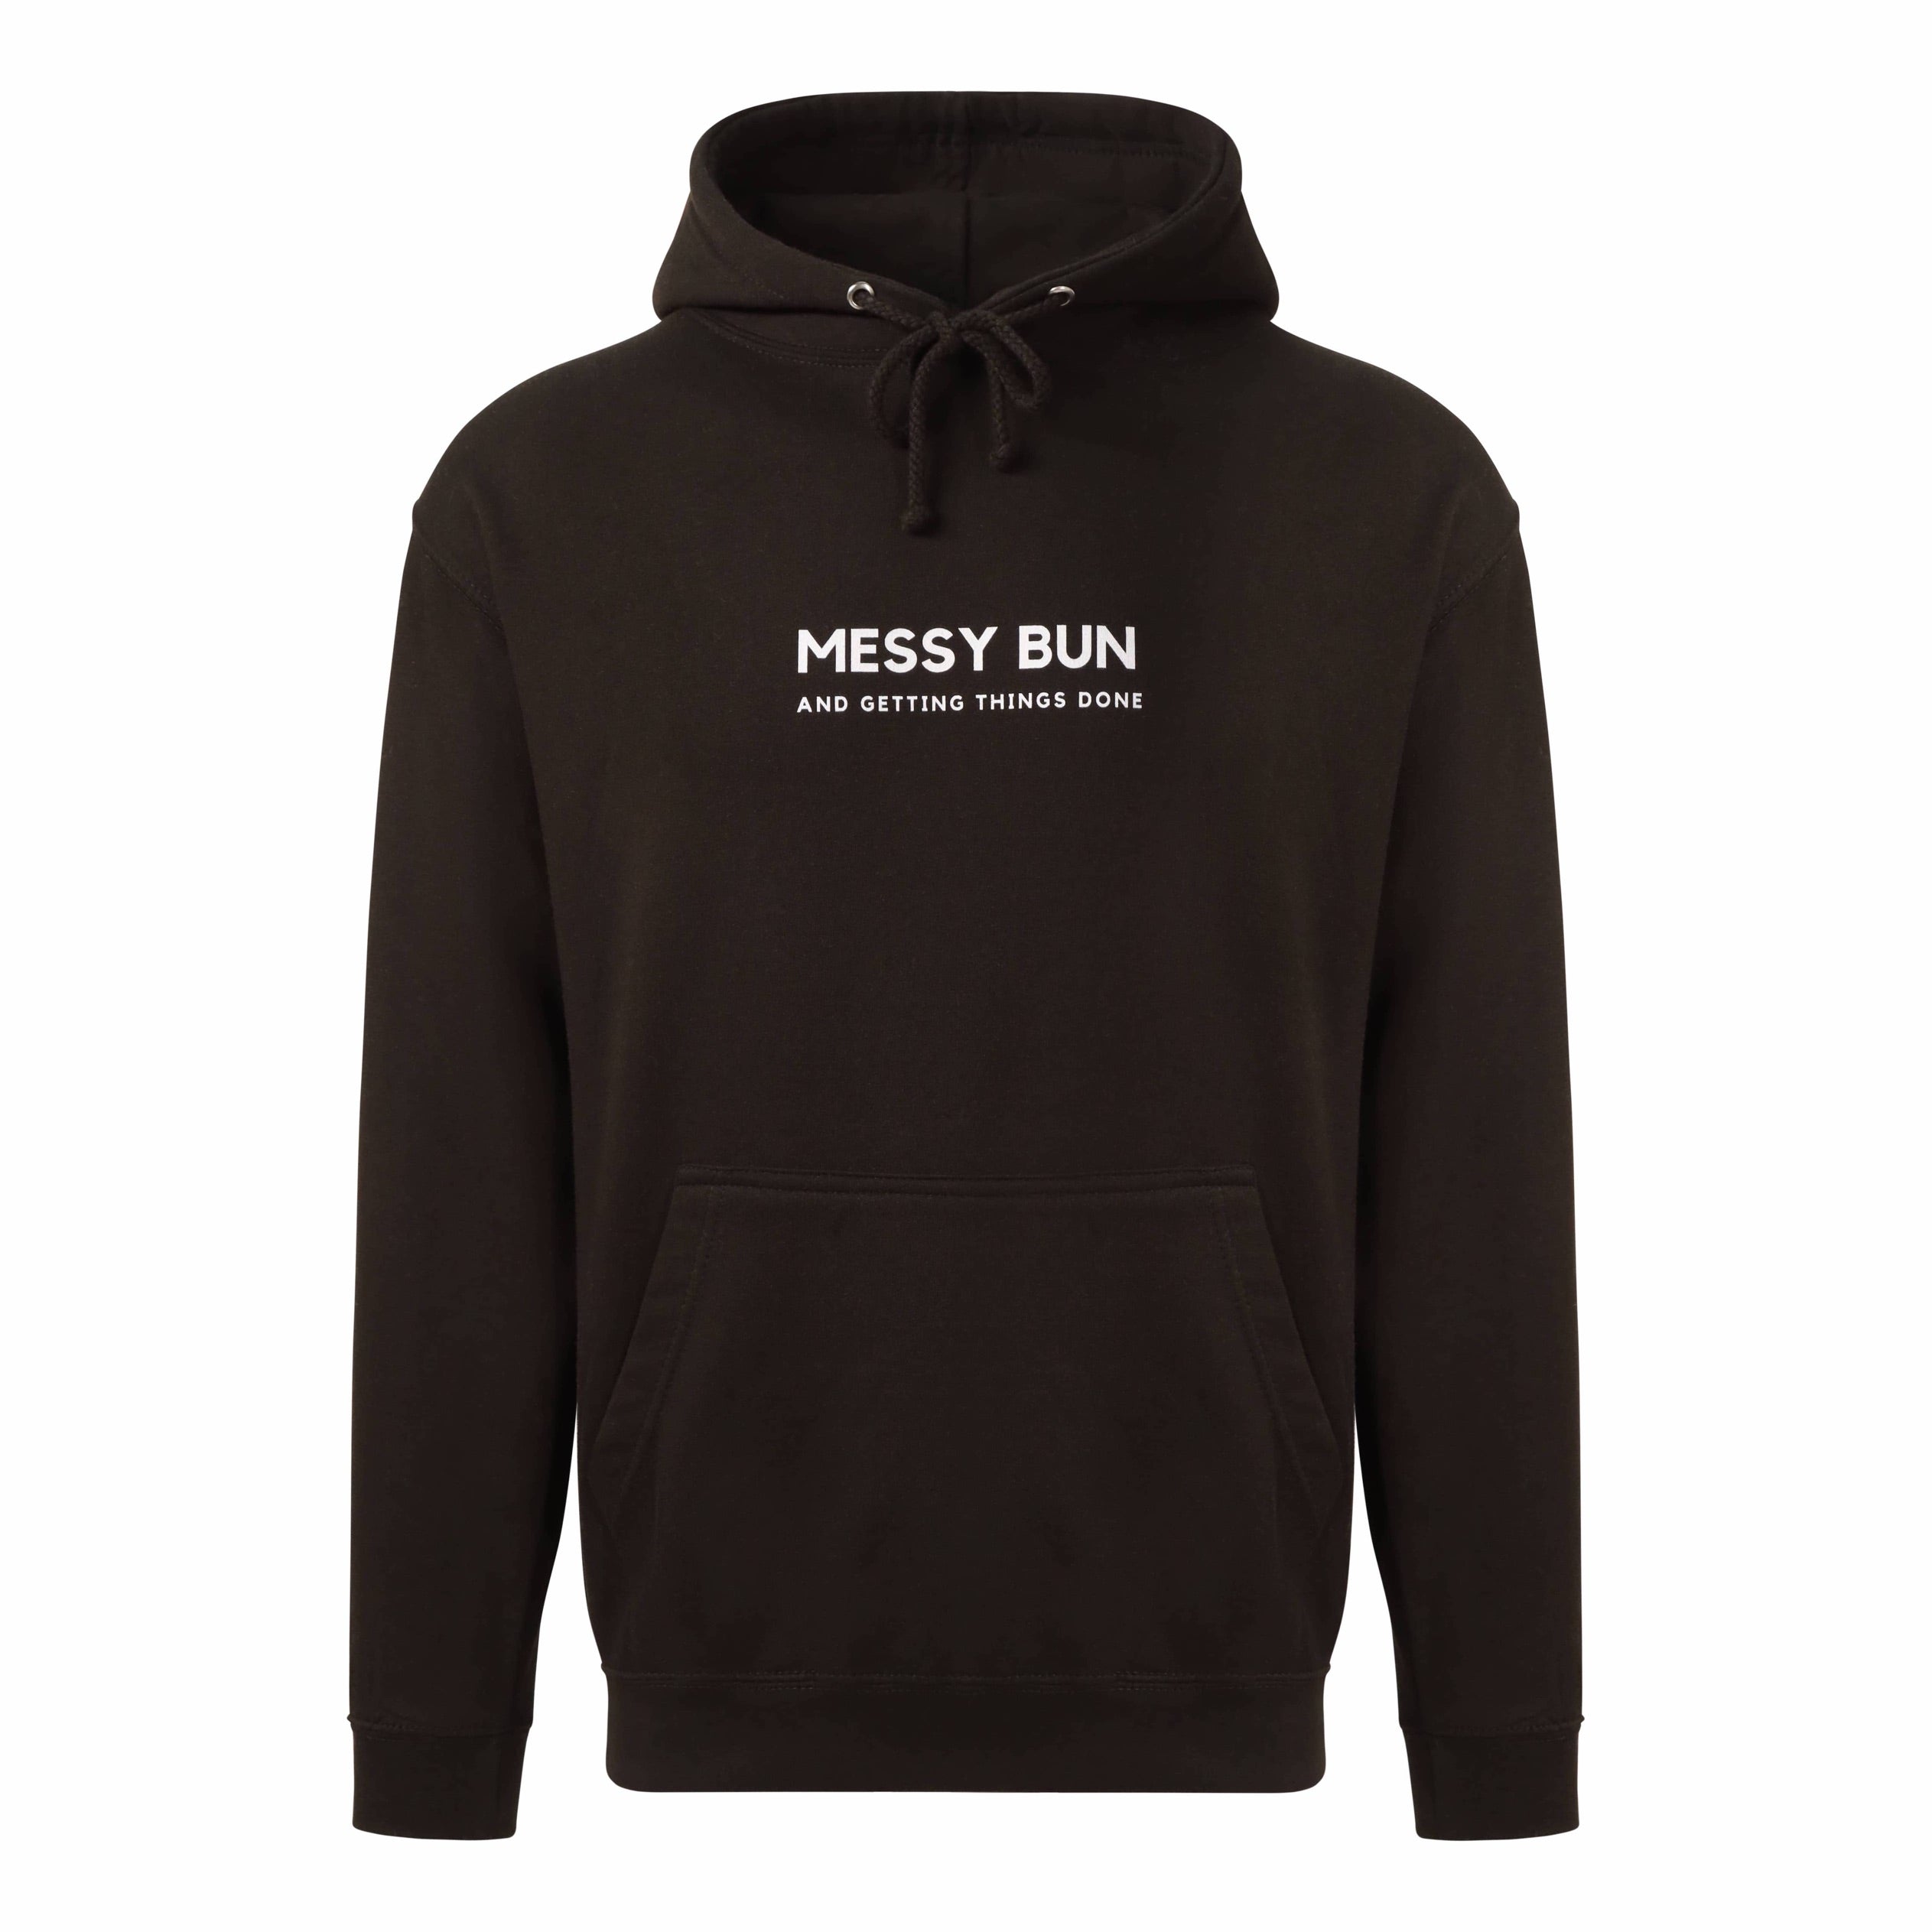 Black hoody that reads: Messy bun and getting things done in white text. Text is in a sans font all caps, messy bun is written bigger than getting things done